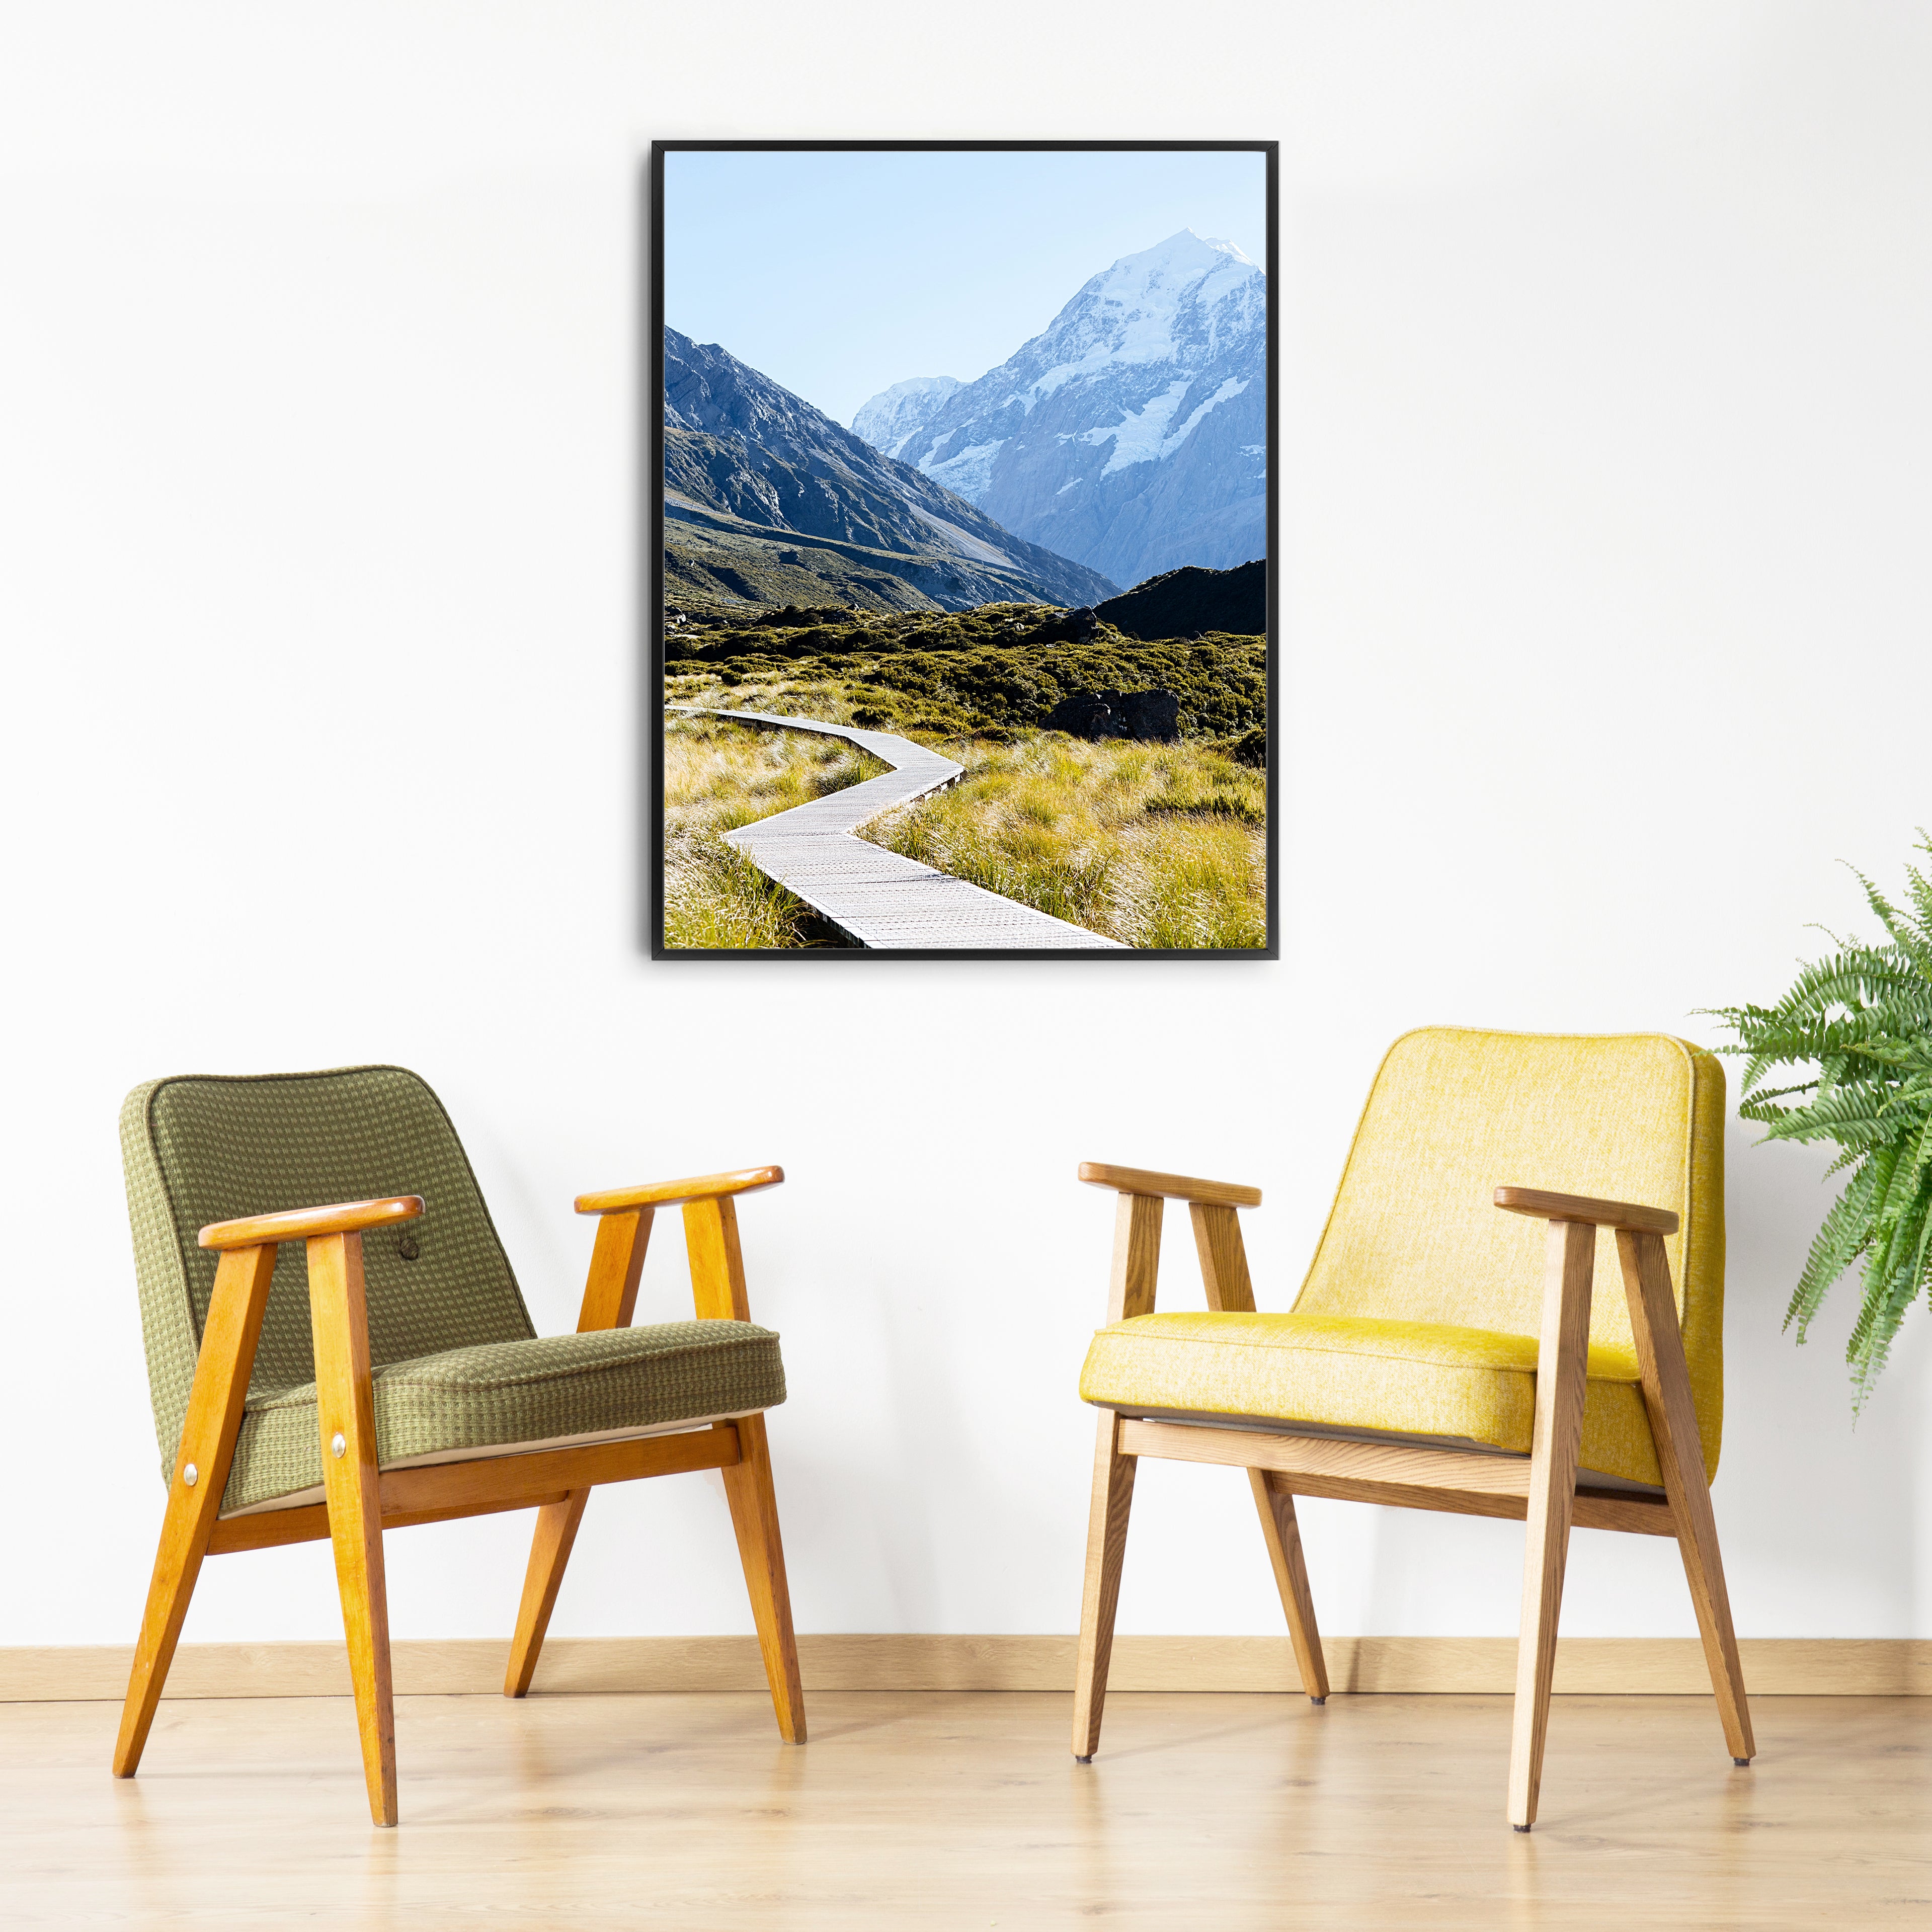 mt cook new zealand south island photography new zealand photographic print photograph of mount cook new zealand travel photography south island